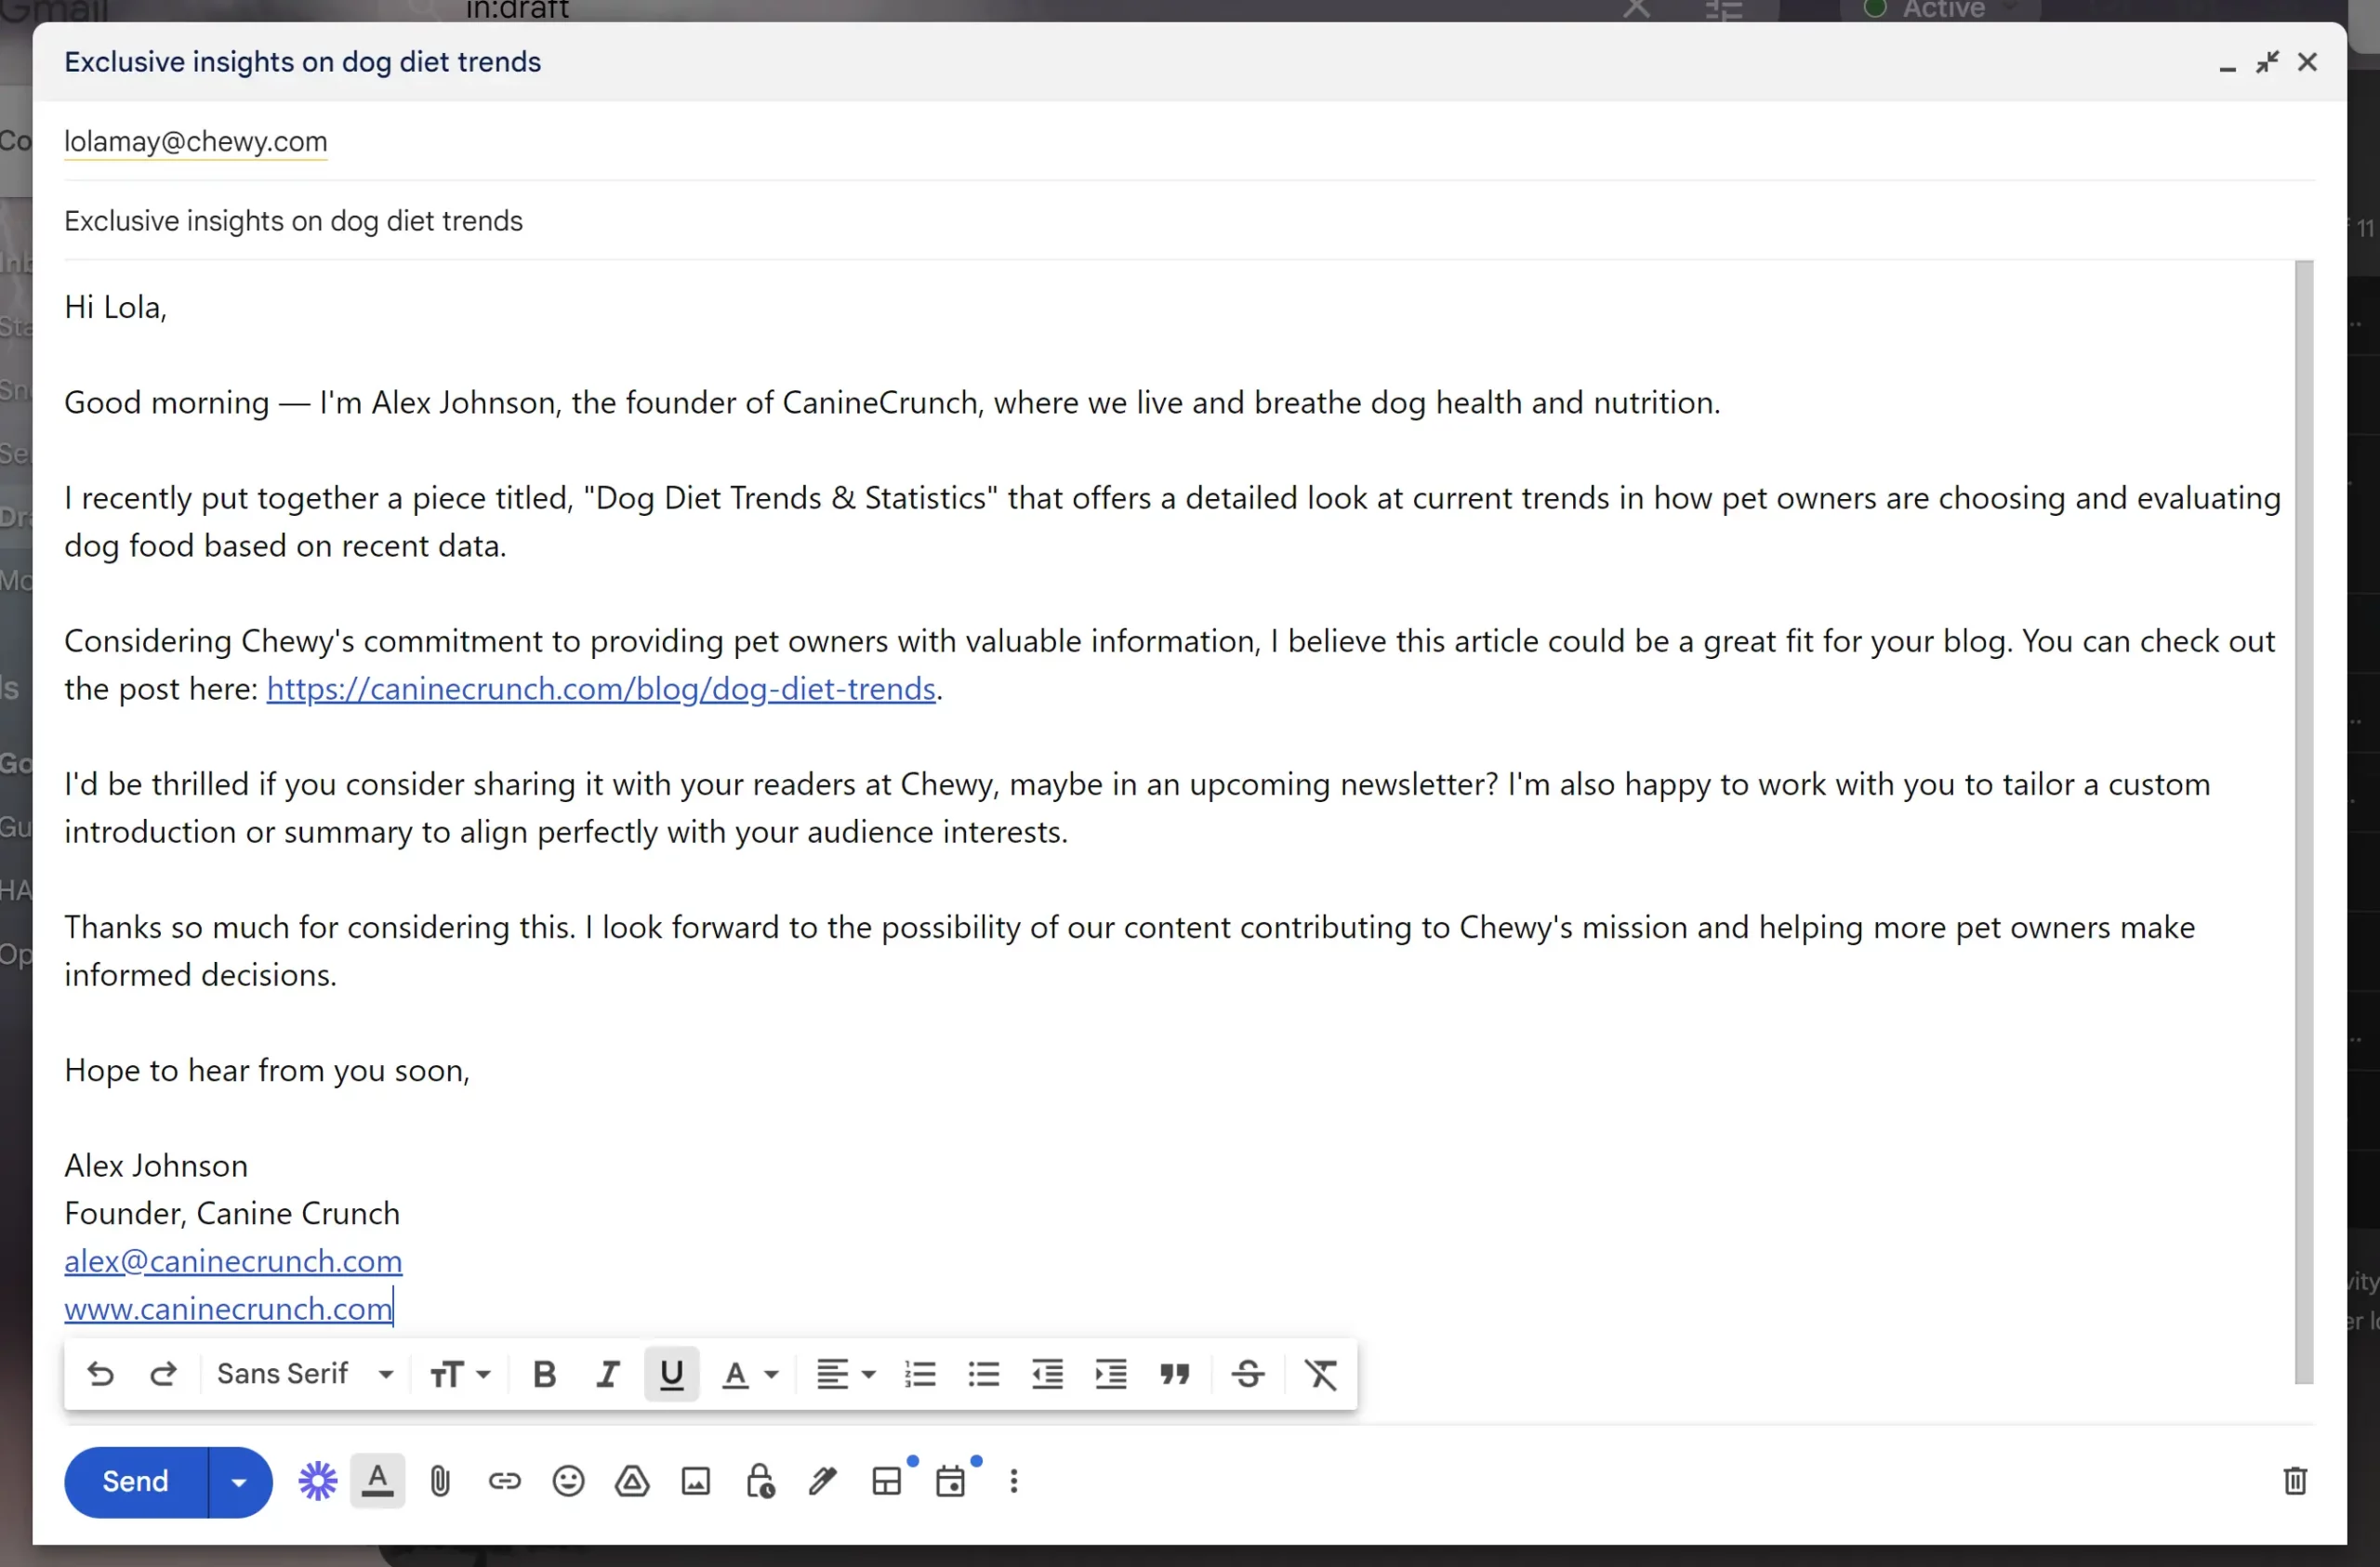 example email reaching out to chewy to share exclusive insights on dog food diet trends as a means to get a backlink